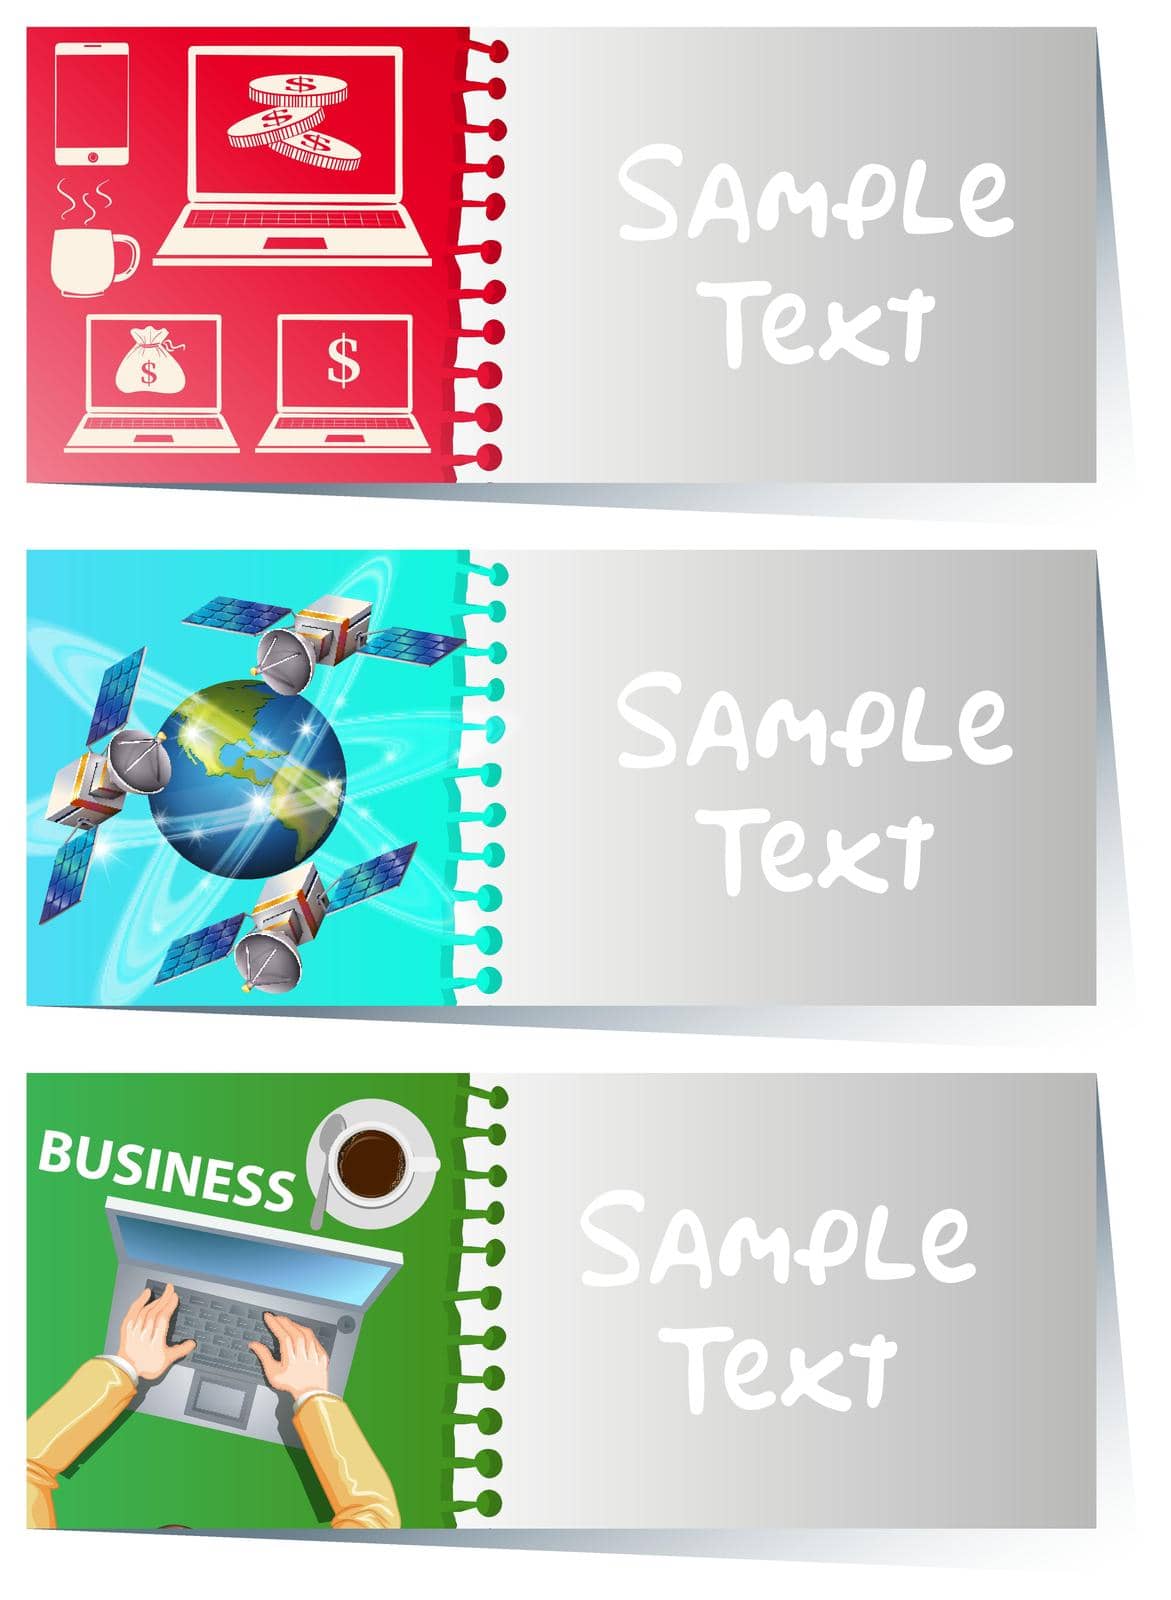 Businesscard template with business items by iimages